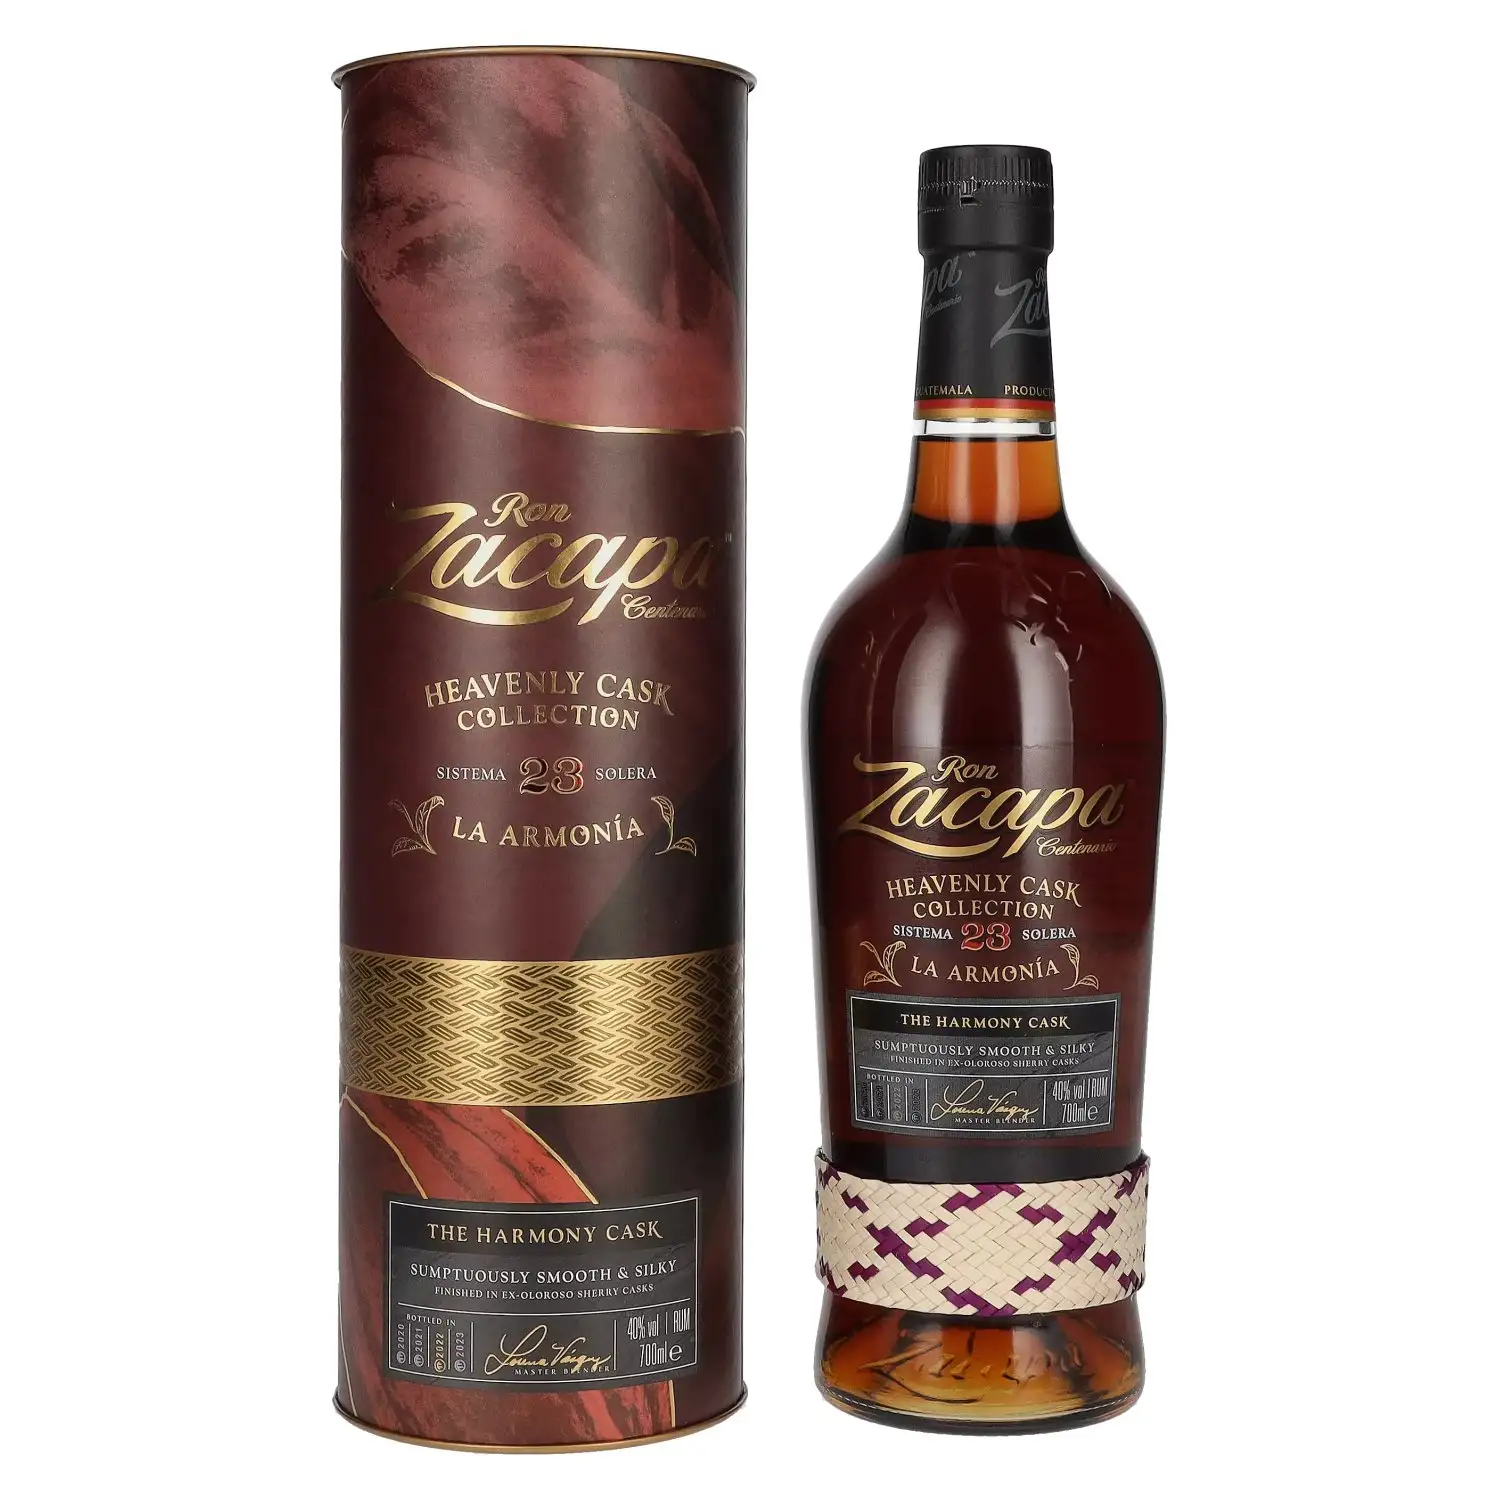 Image of the front of the bottle of the rum Ron Zacapa LA ARMONIA The Harmony Cask